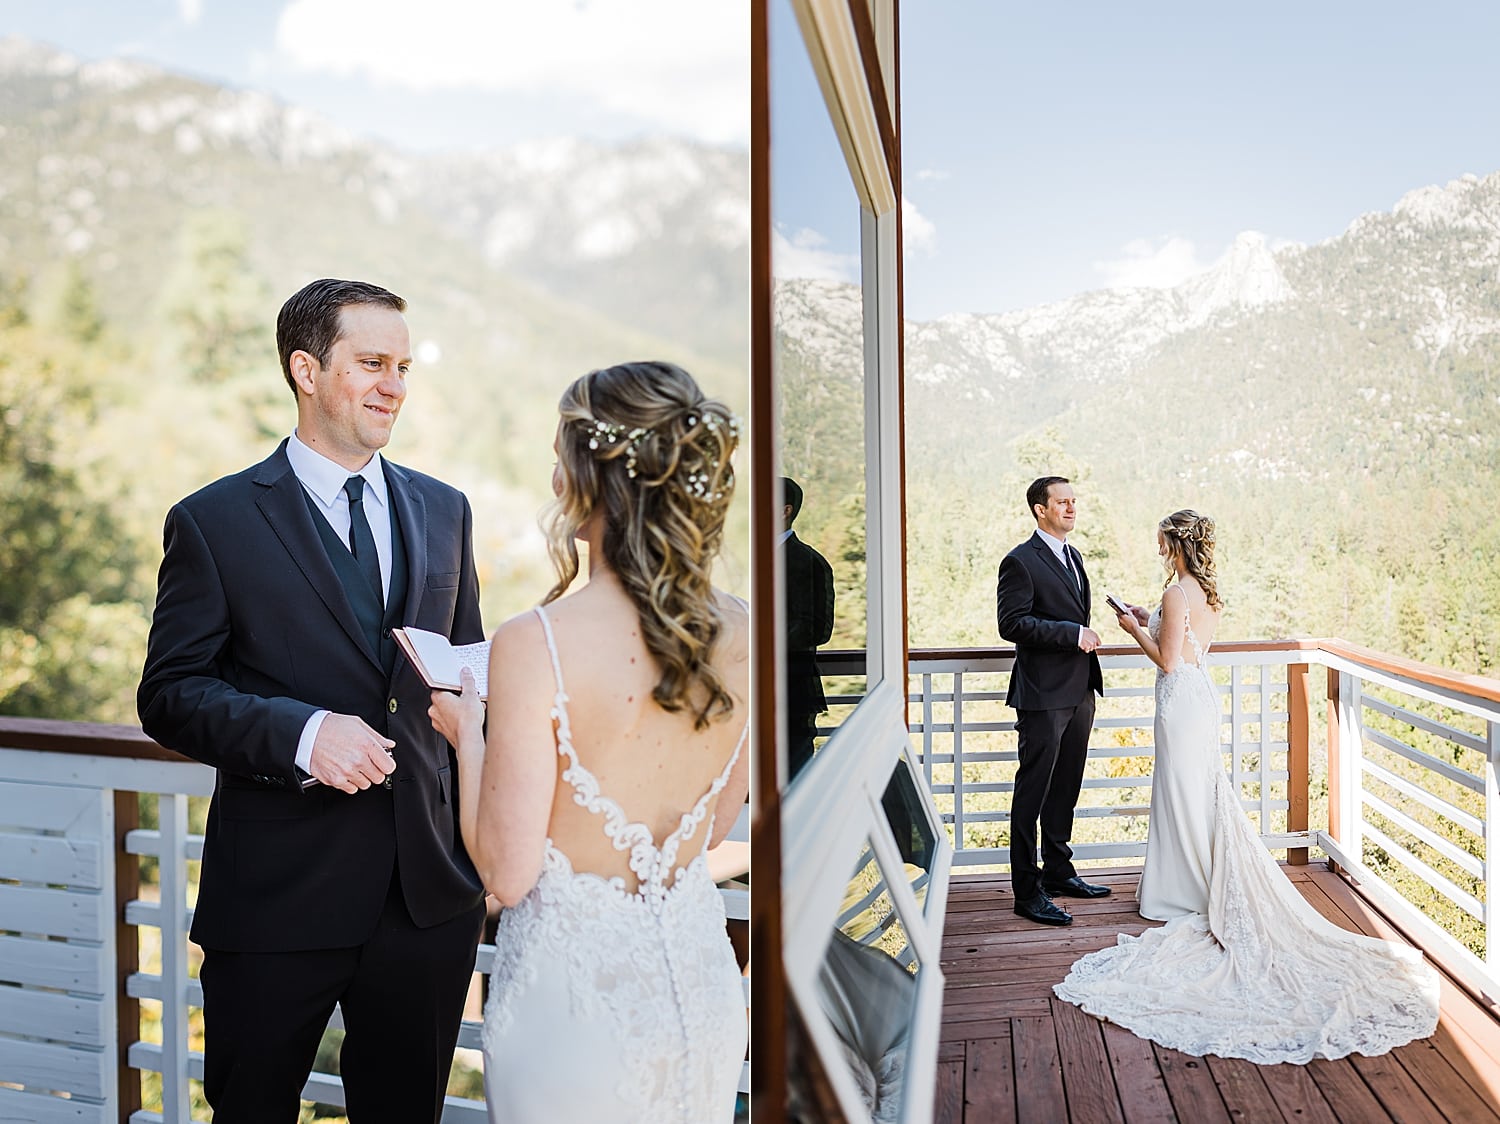 Private vows Idyllwild pine cove wedding